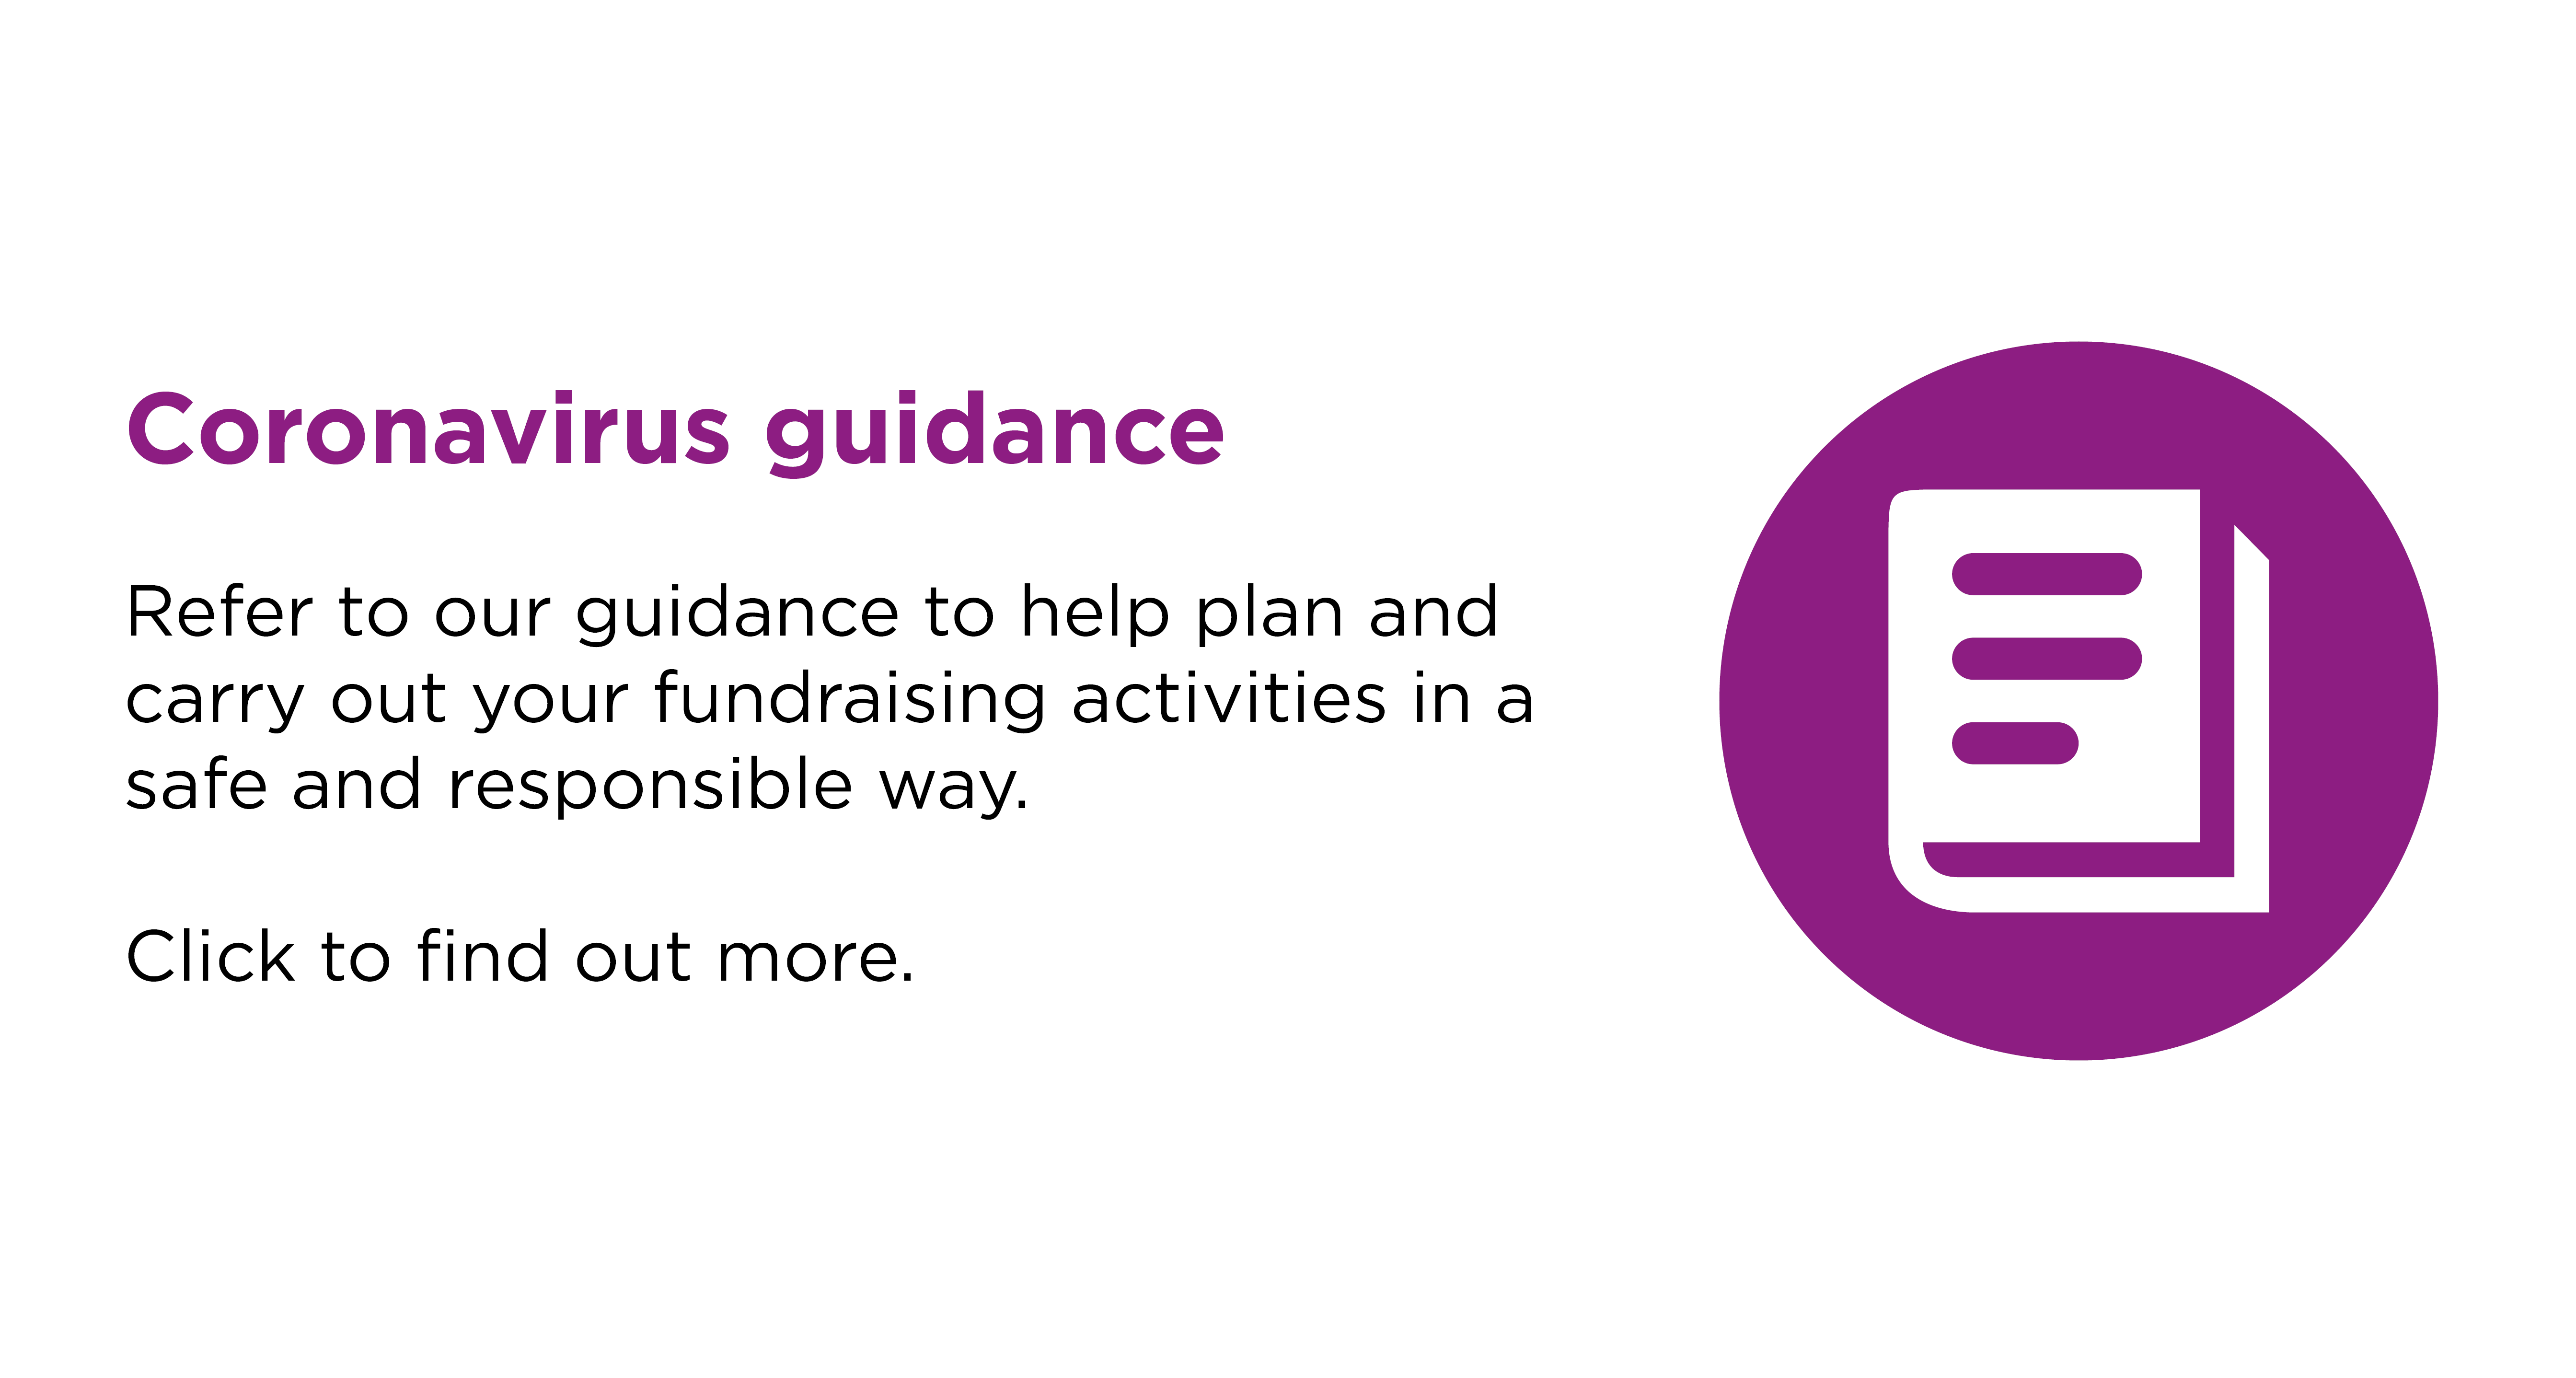 Refer to our Coronavirus guidance to help plan and carry out your fundraising activities